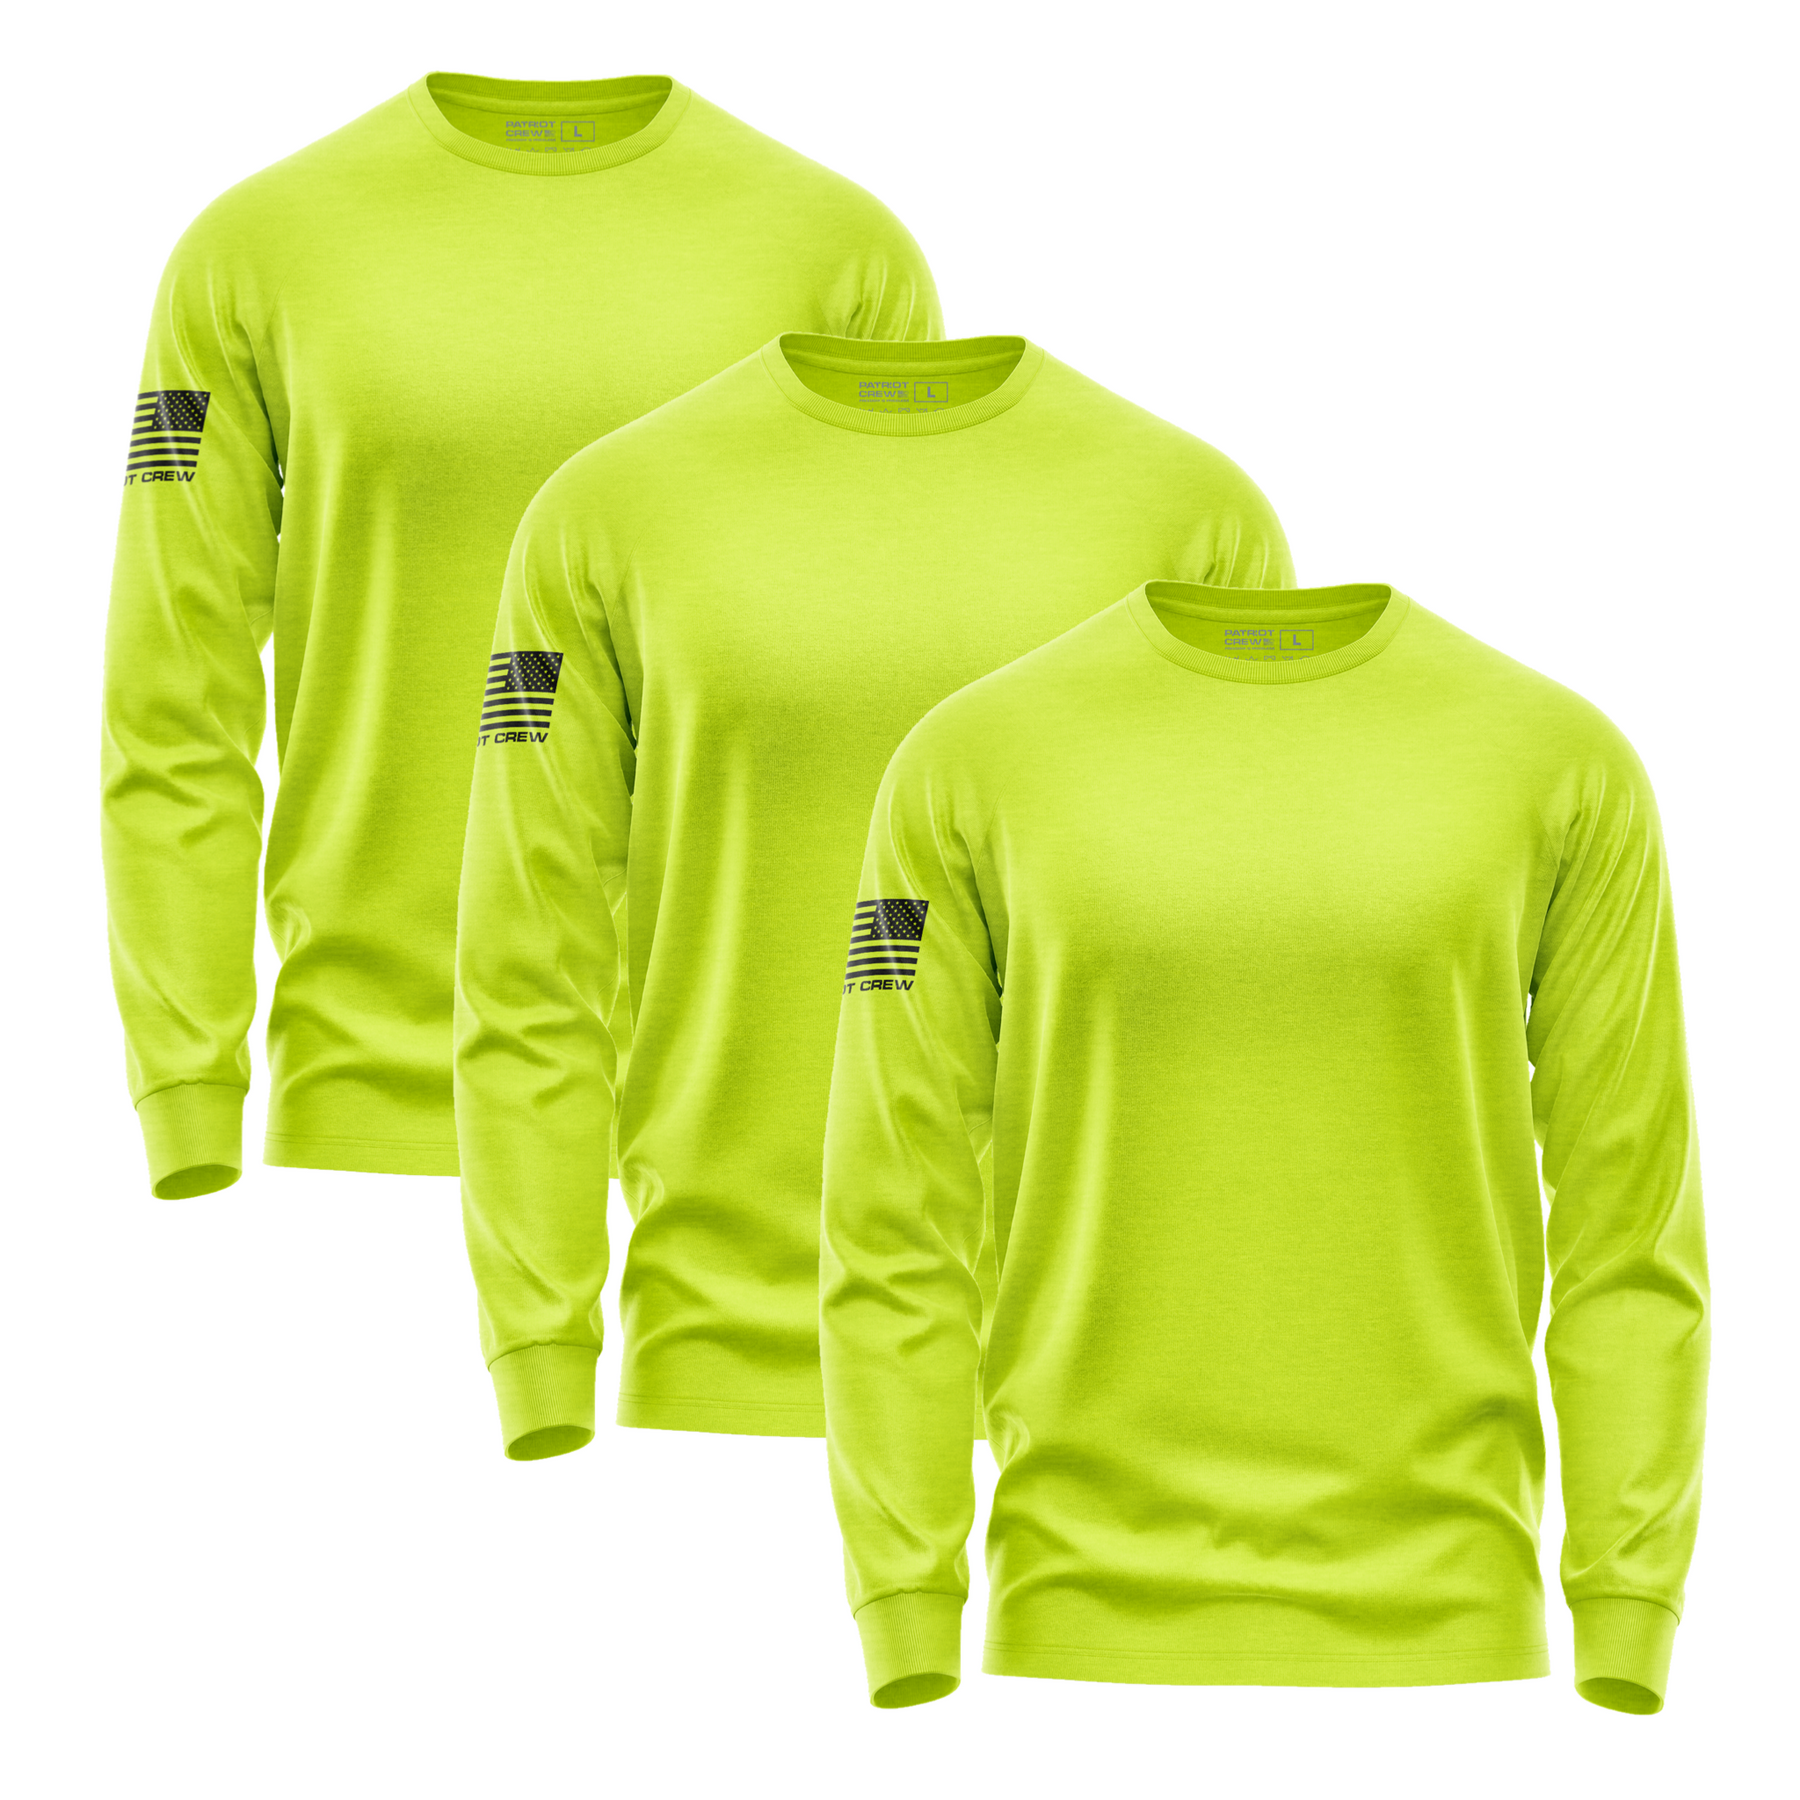 Safety Yellow Long-Sleeve T-Shirt (3 Pack)